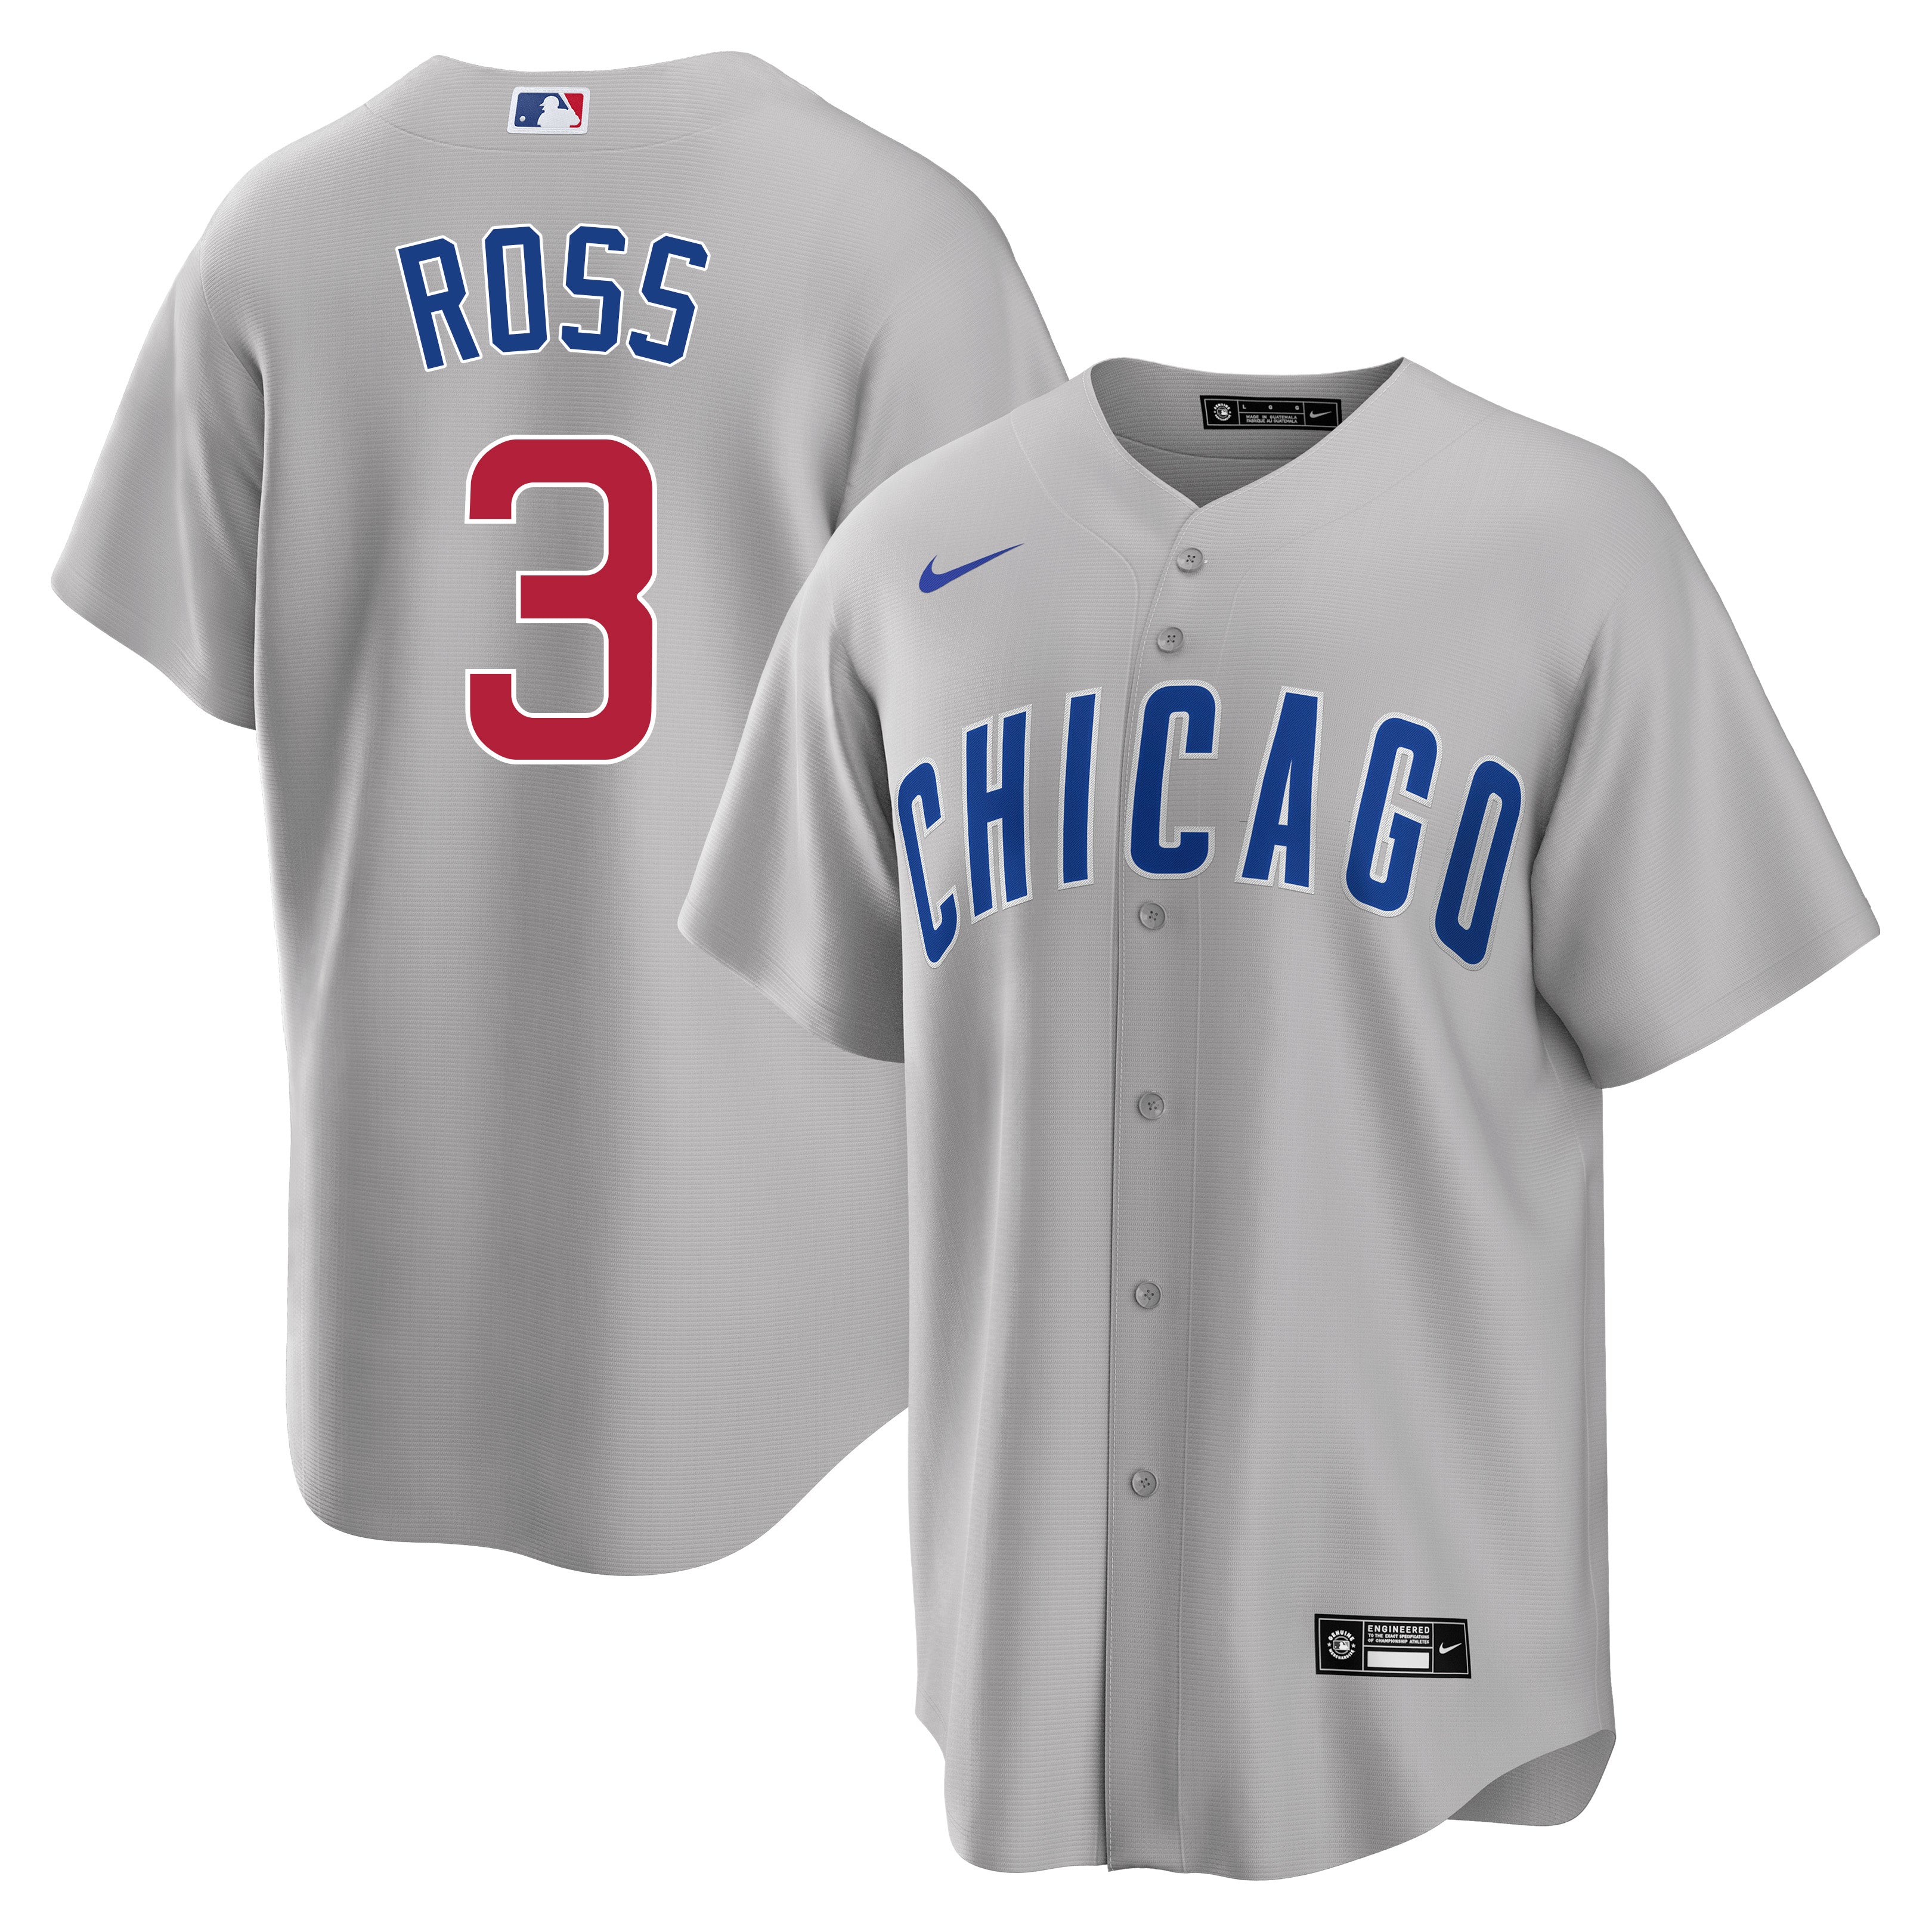 David Ross Chicago Cubs Autographed Jersey JSA Certified